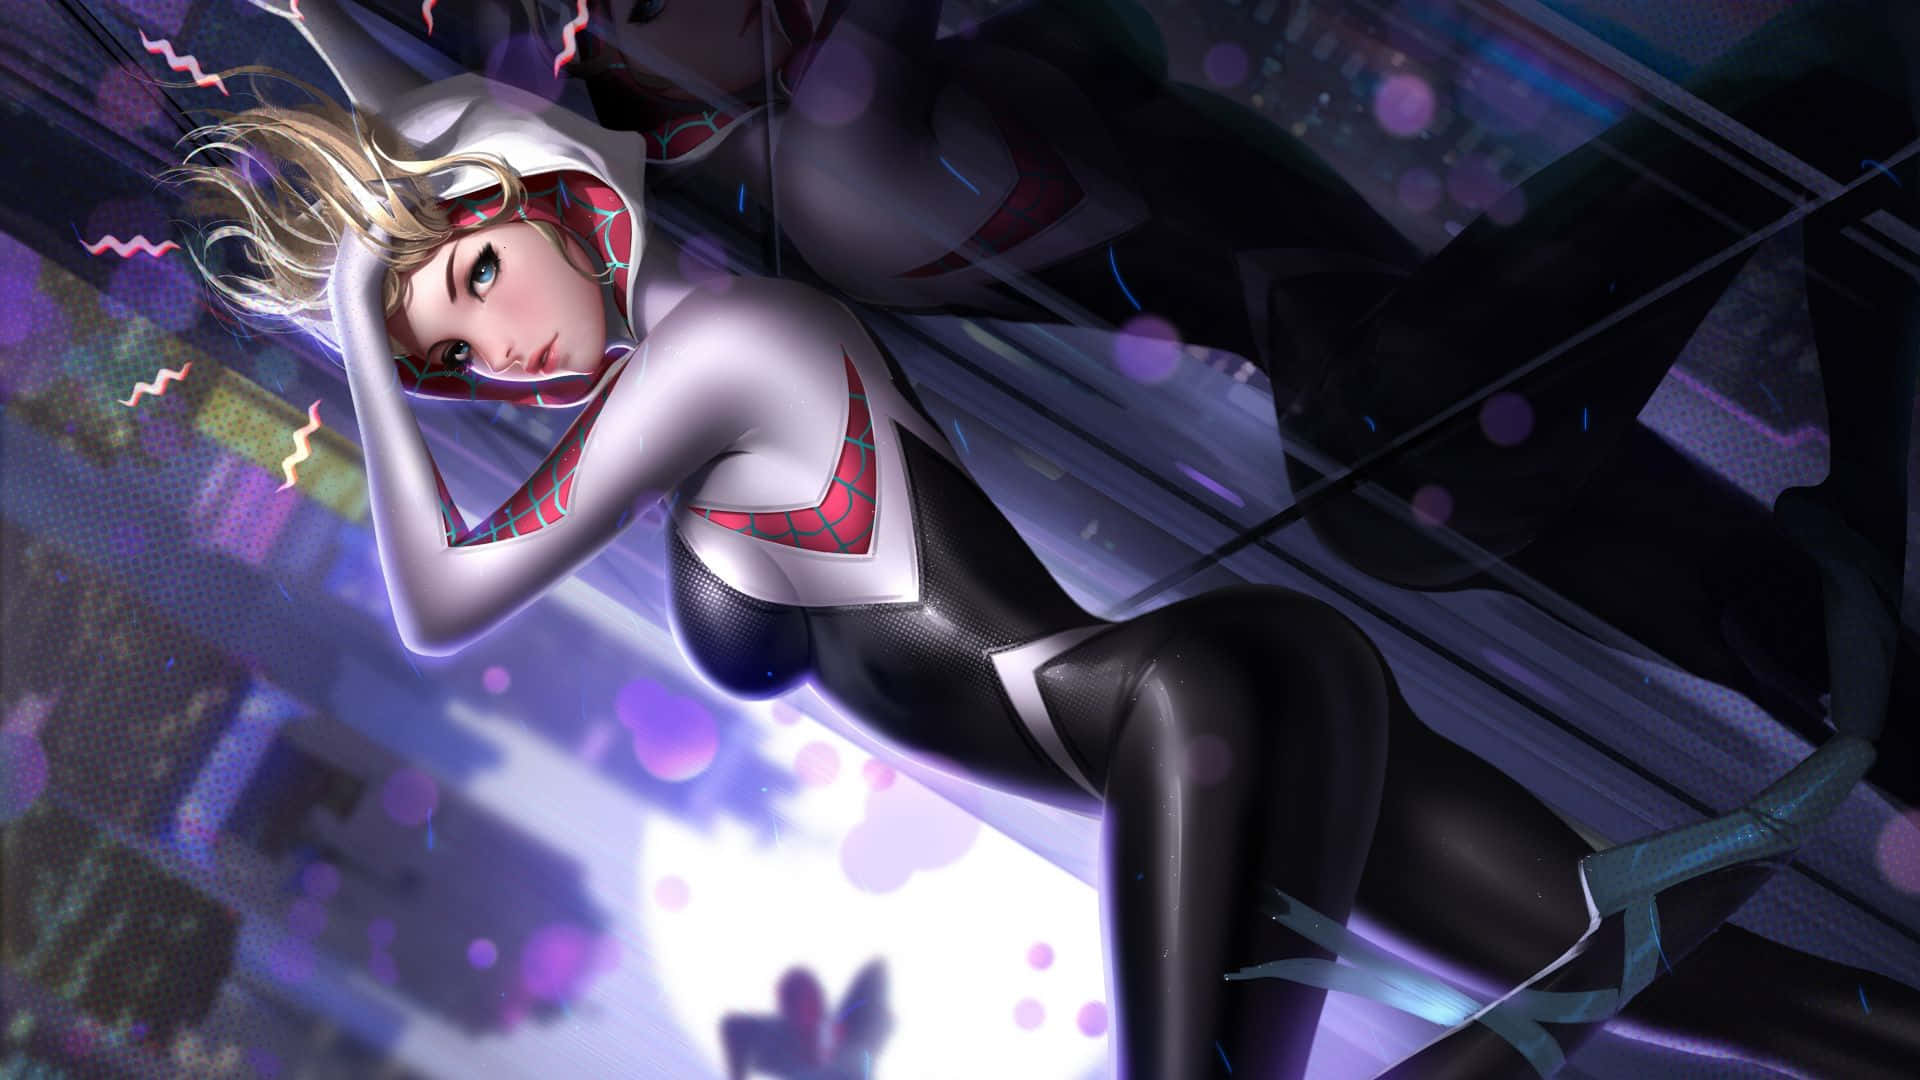 Spider Gwen swings into action to save the city